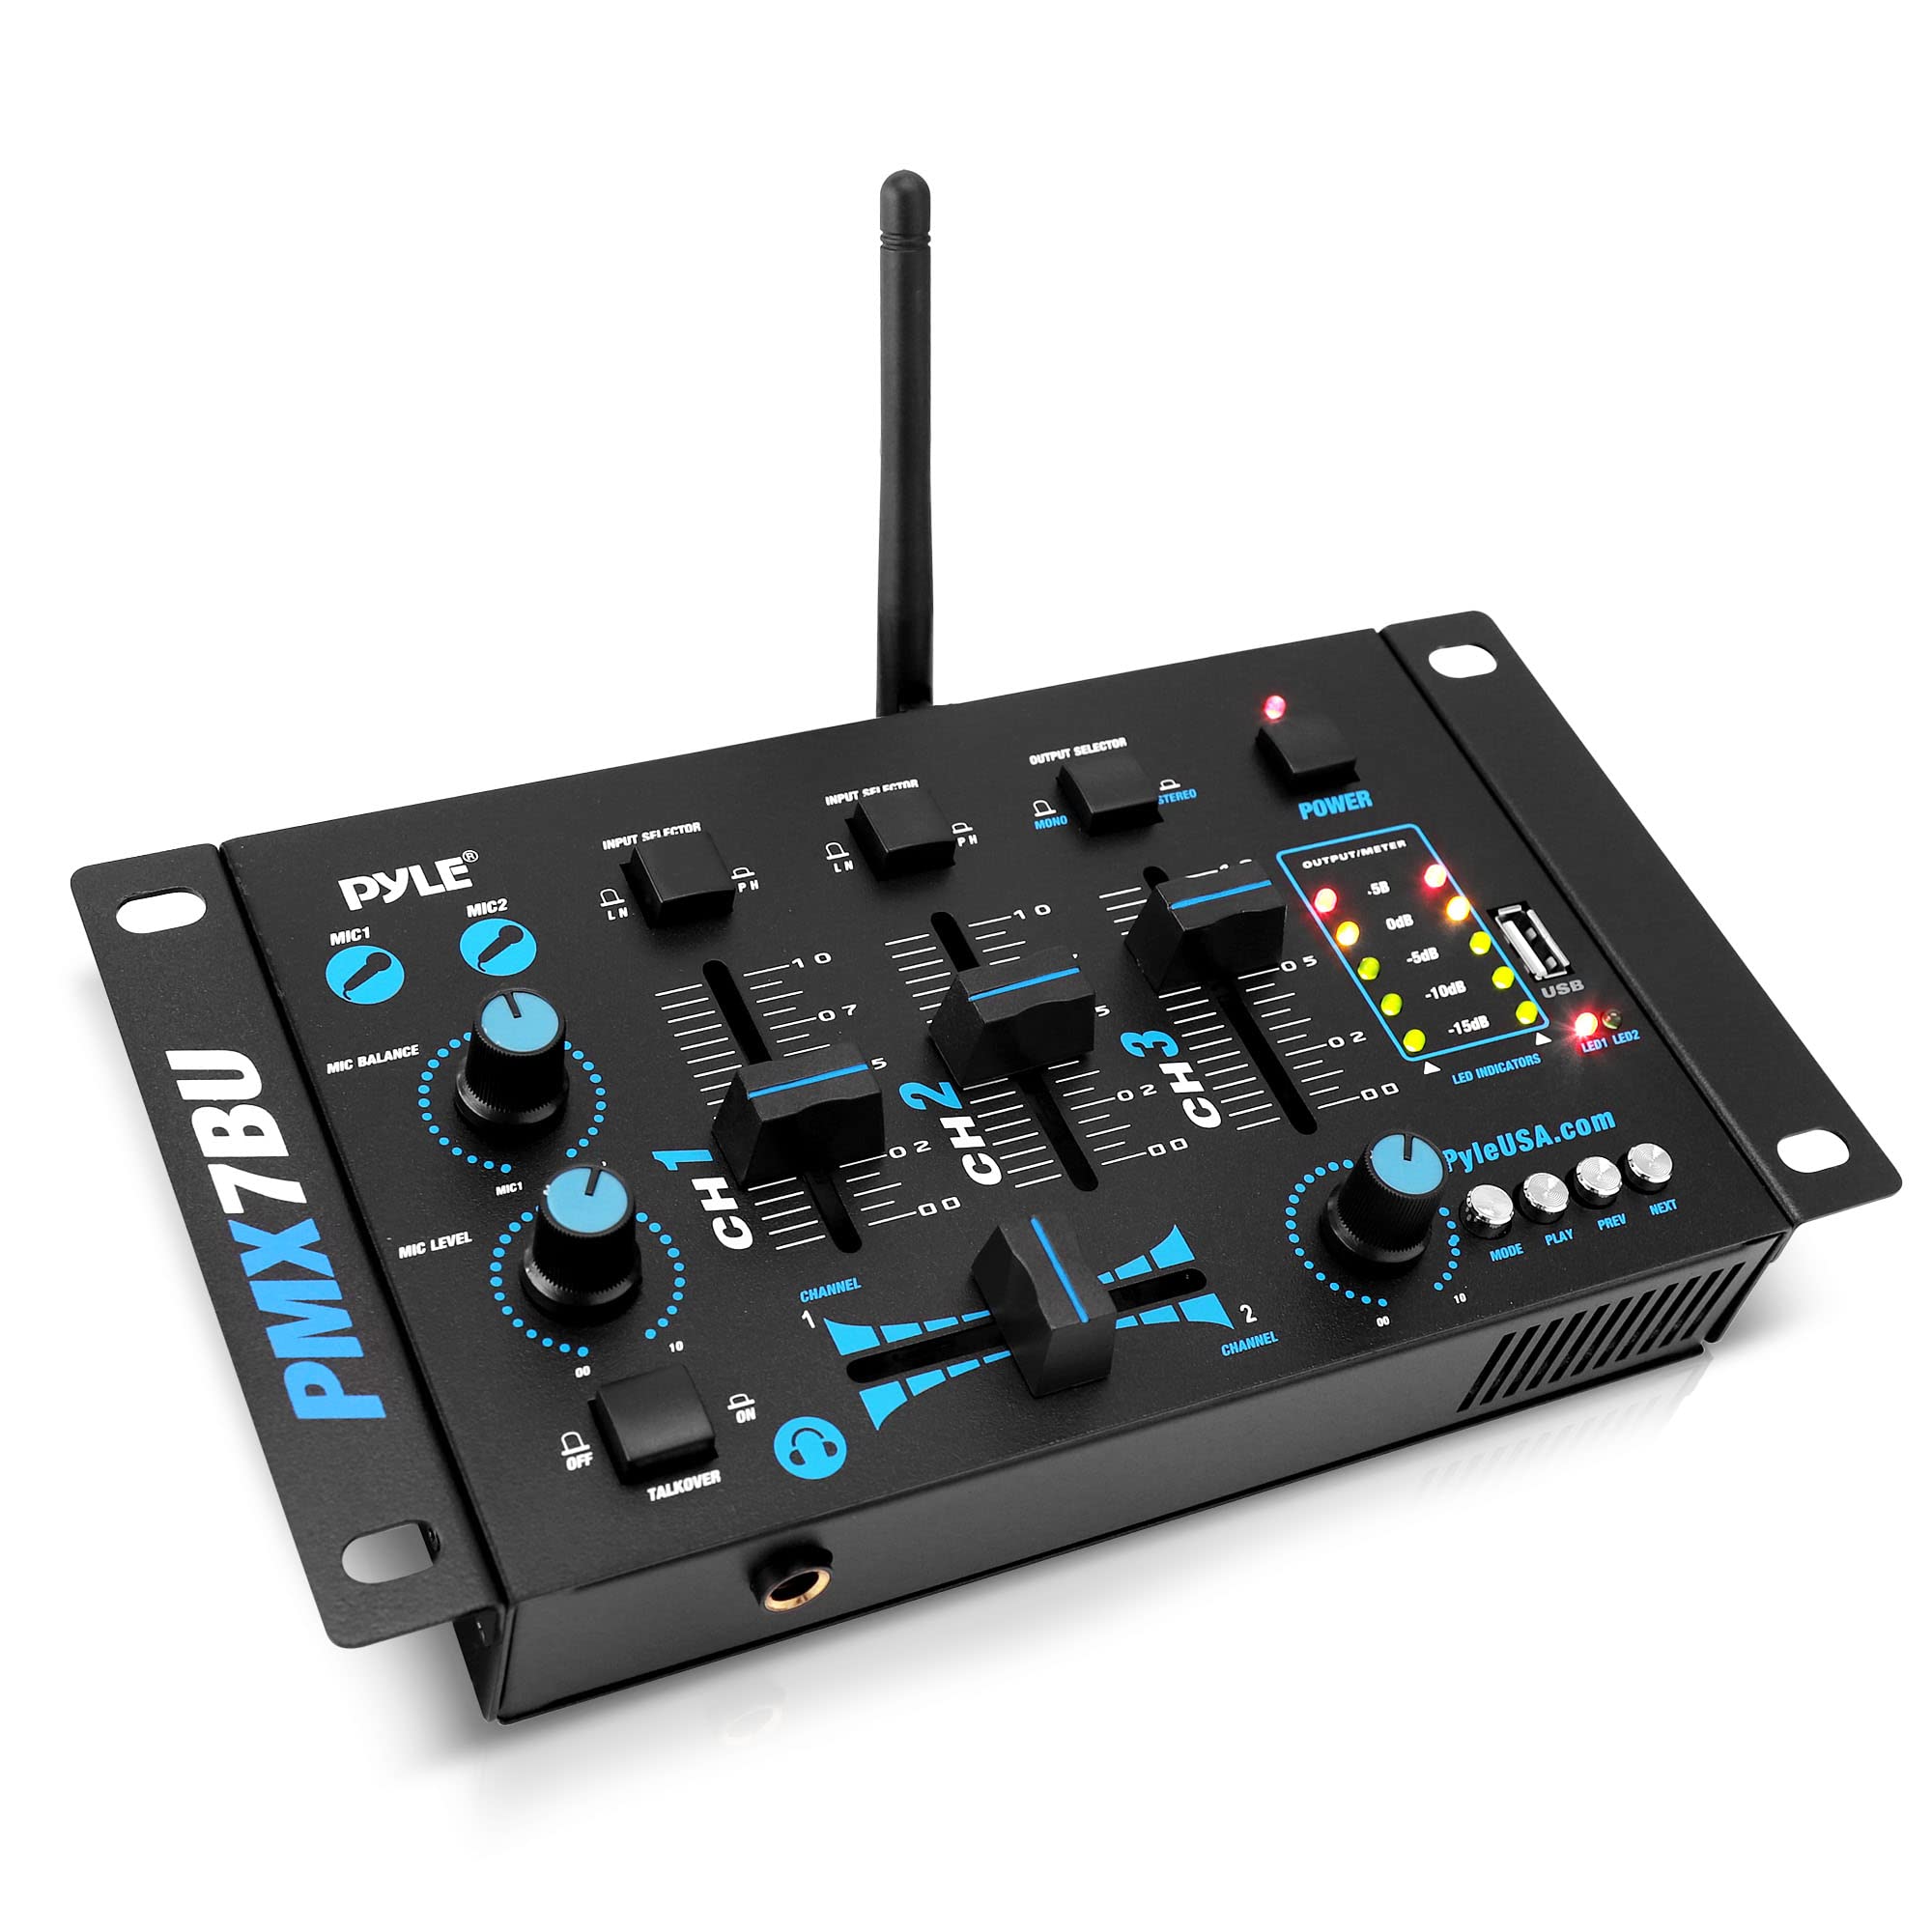 Pyle, 3 Wireless Audio Machine-3 Channel Bluetooth Compatible DJ Controller Sound Mixer System with Mic-Talkover, USB Reader, Dual RCA Phono/Line in, Microphone Input, Headphone Jack PMX7BU,Black